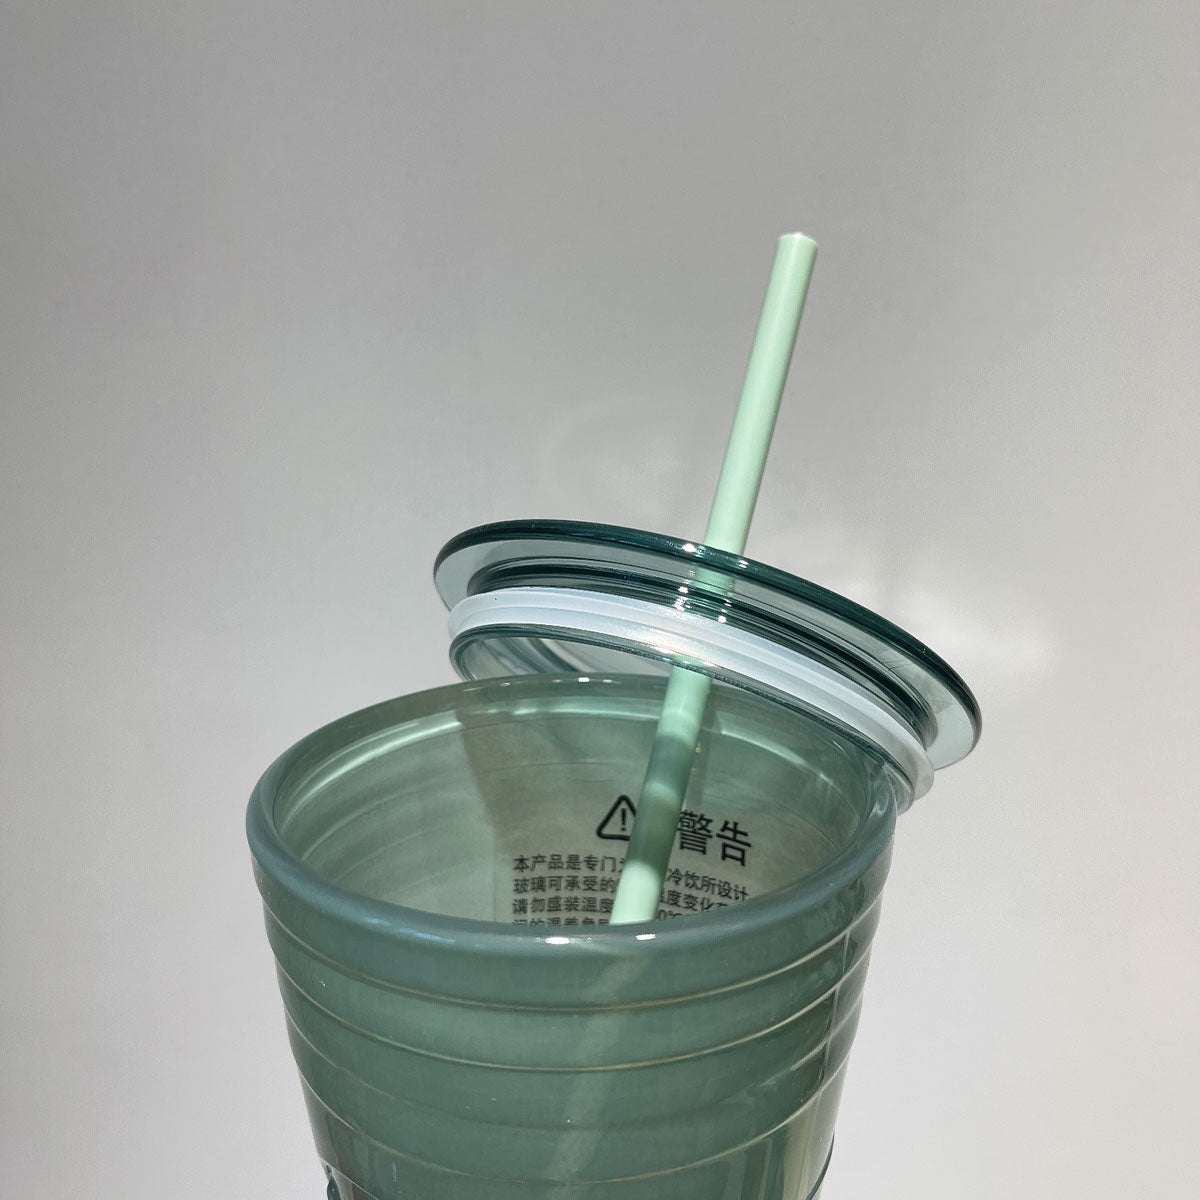 Starbucks mint green double-layer Classic Glass Straw 20oz cup